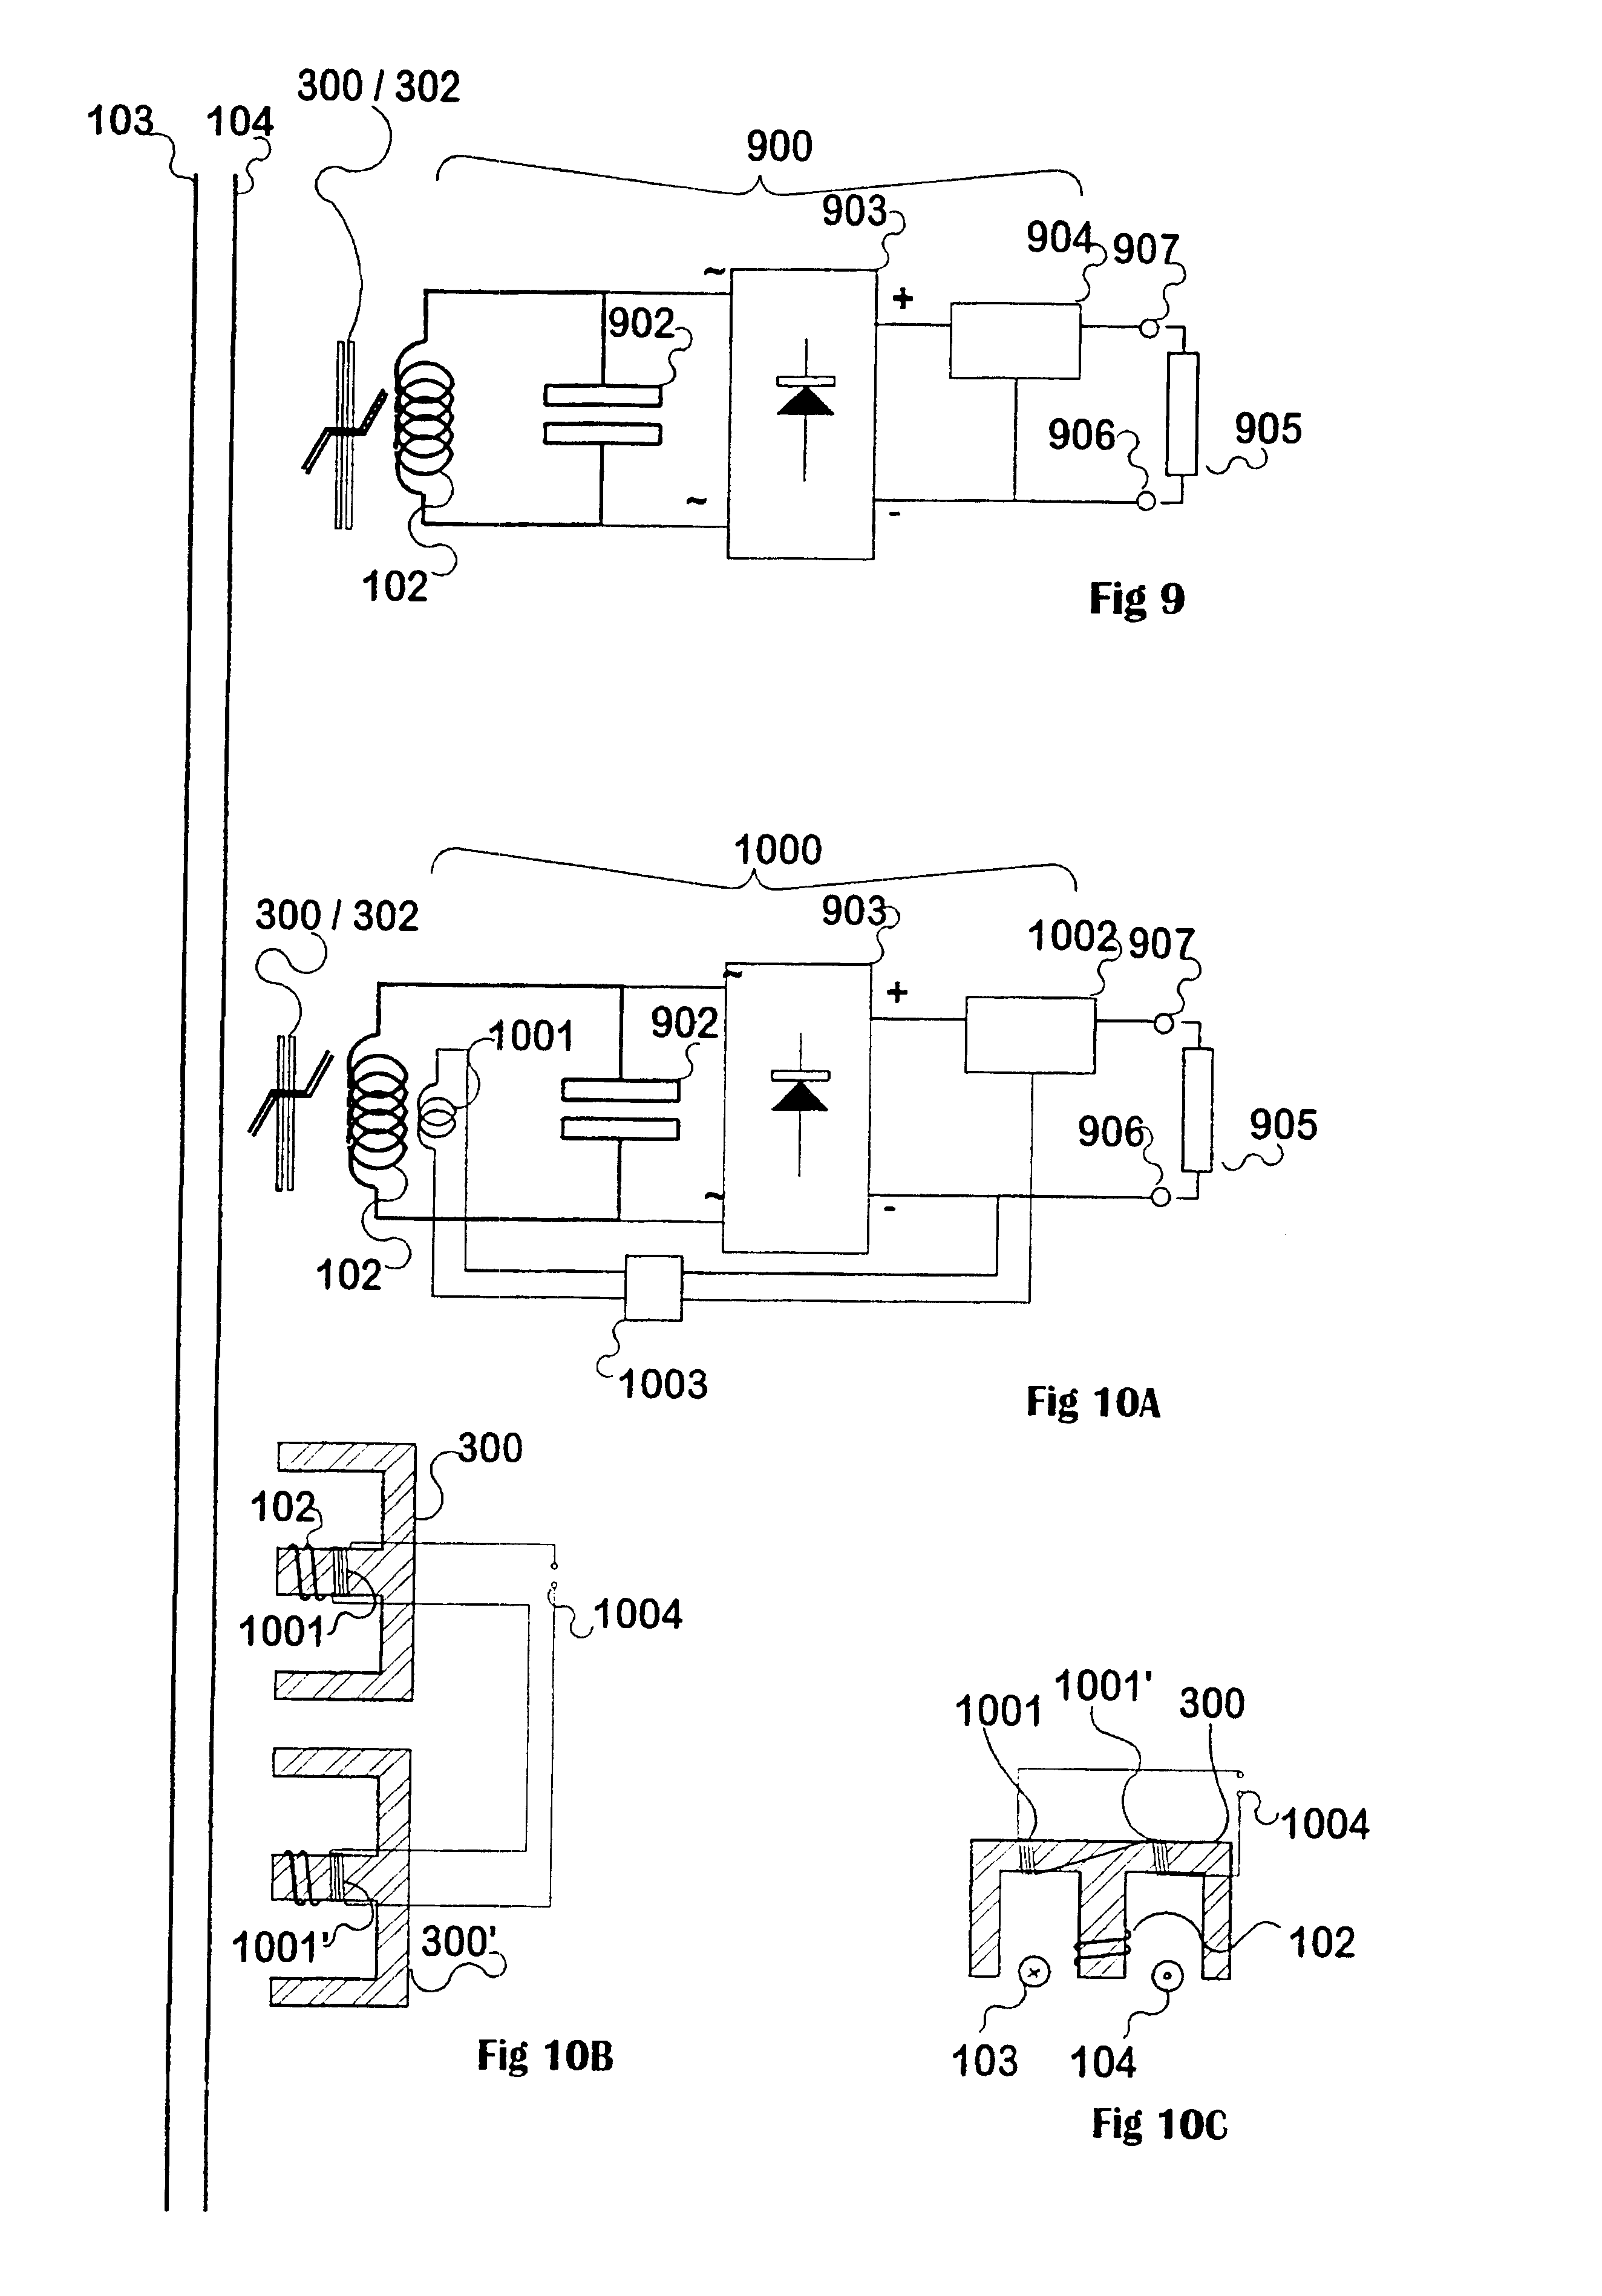 Control of inductive power transfer pickups